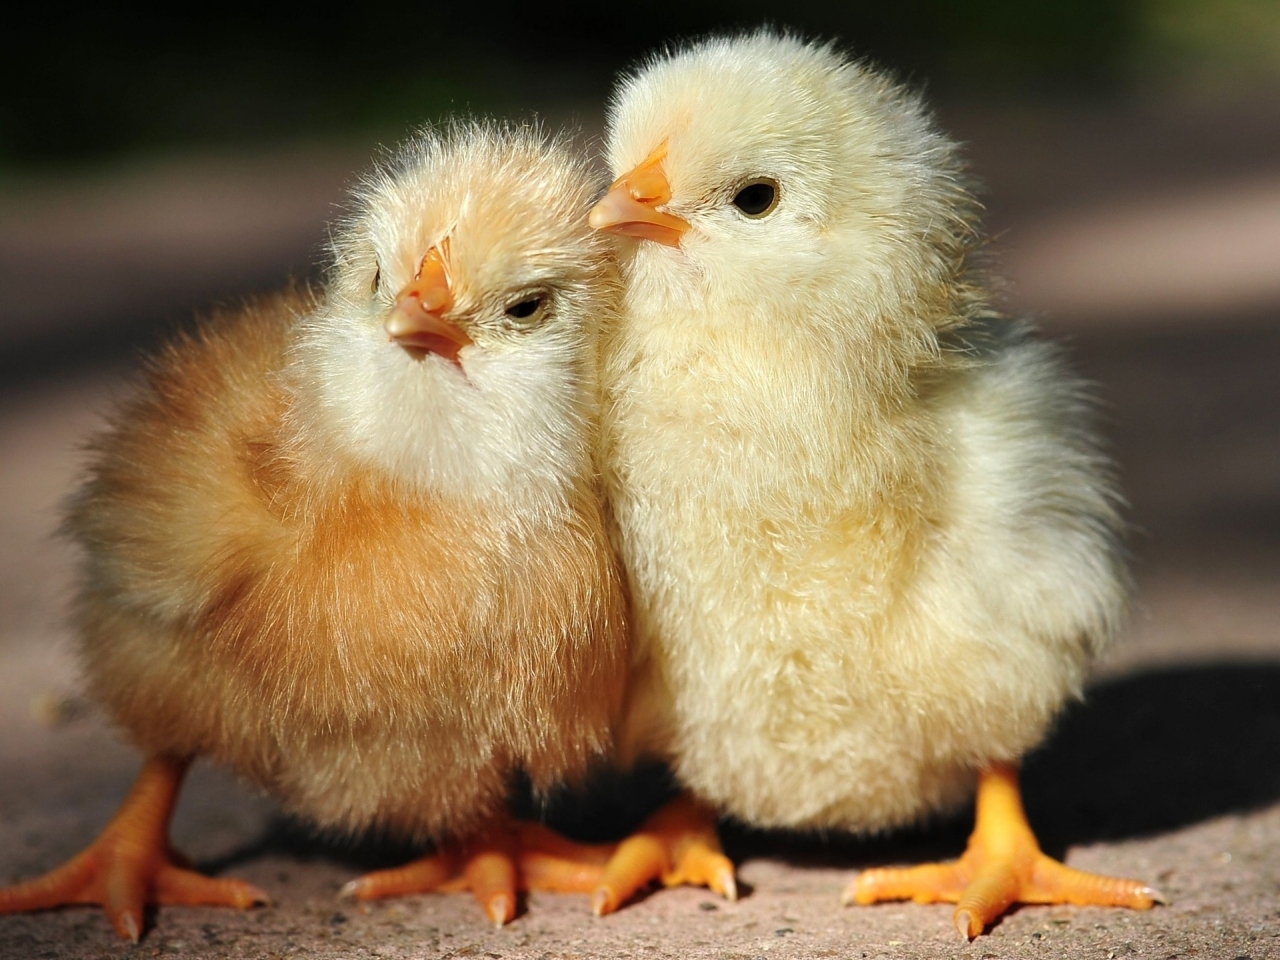 Chicks talk to each other from inside their eggs.